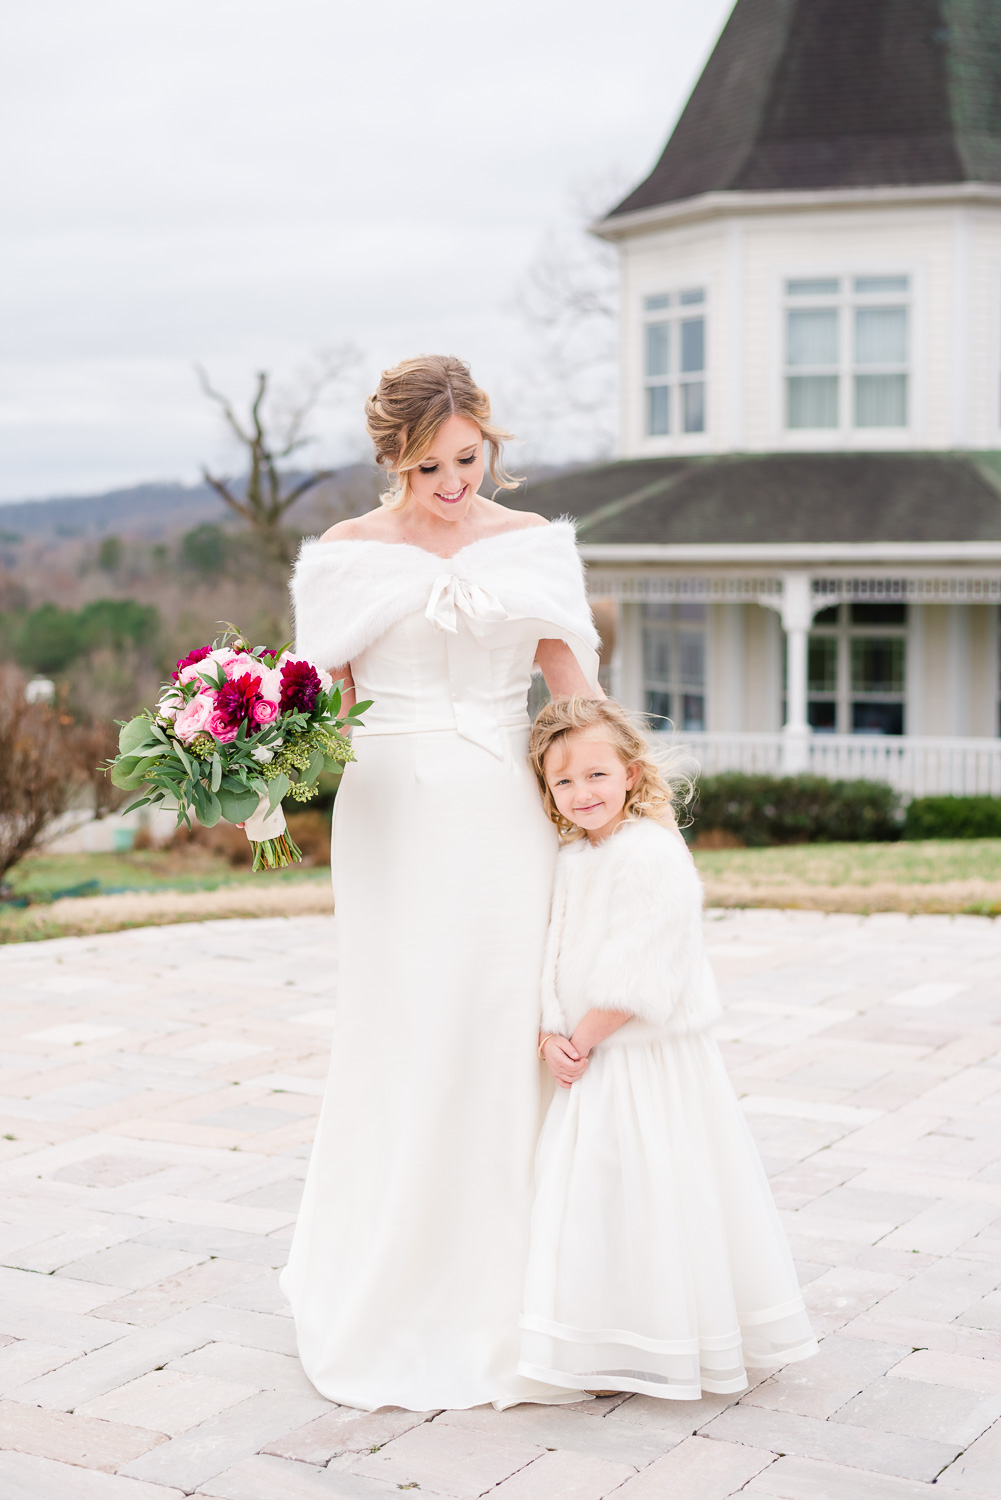 adorable flower girl and bride looking down at flower girls outside on the stone patio at Whitestone inn.